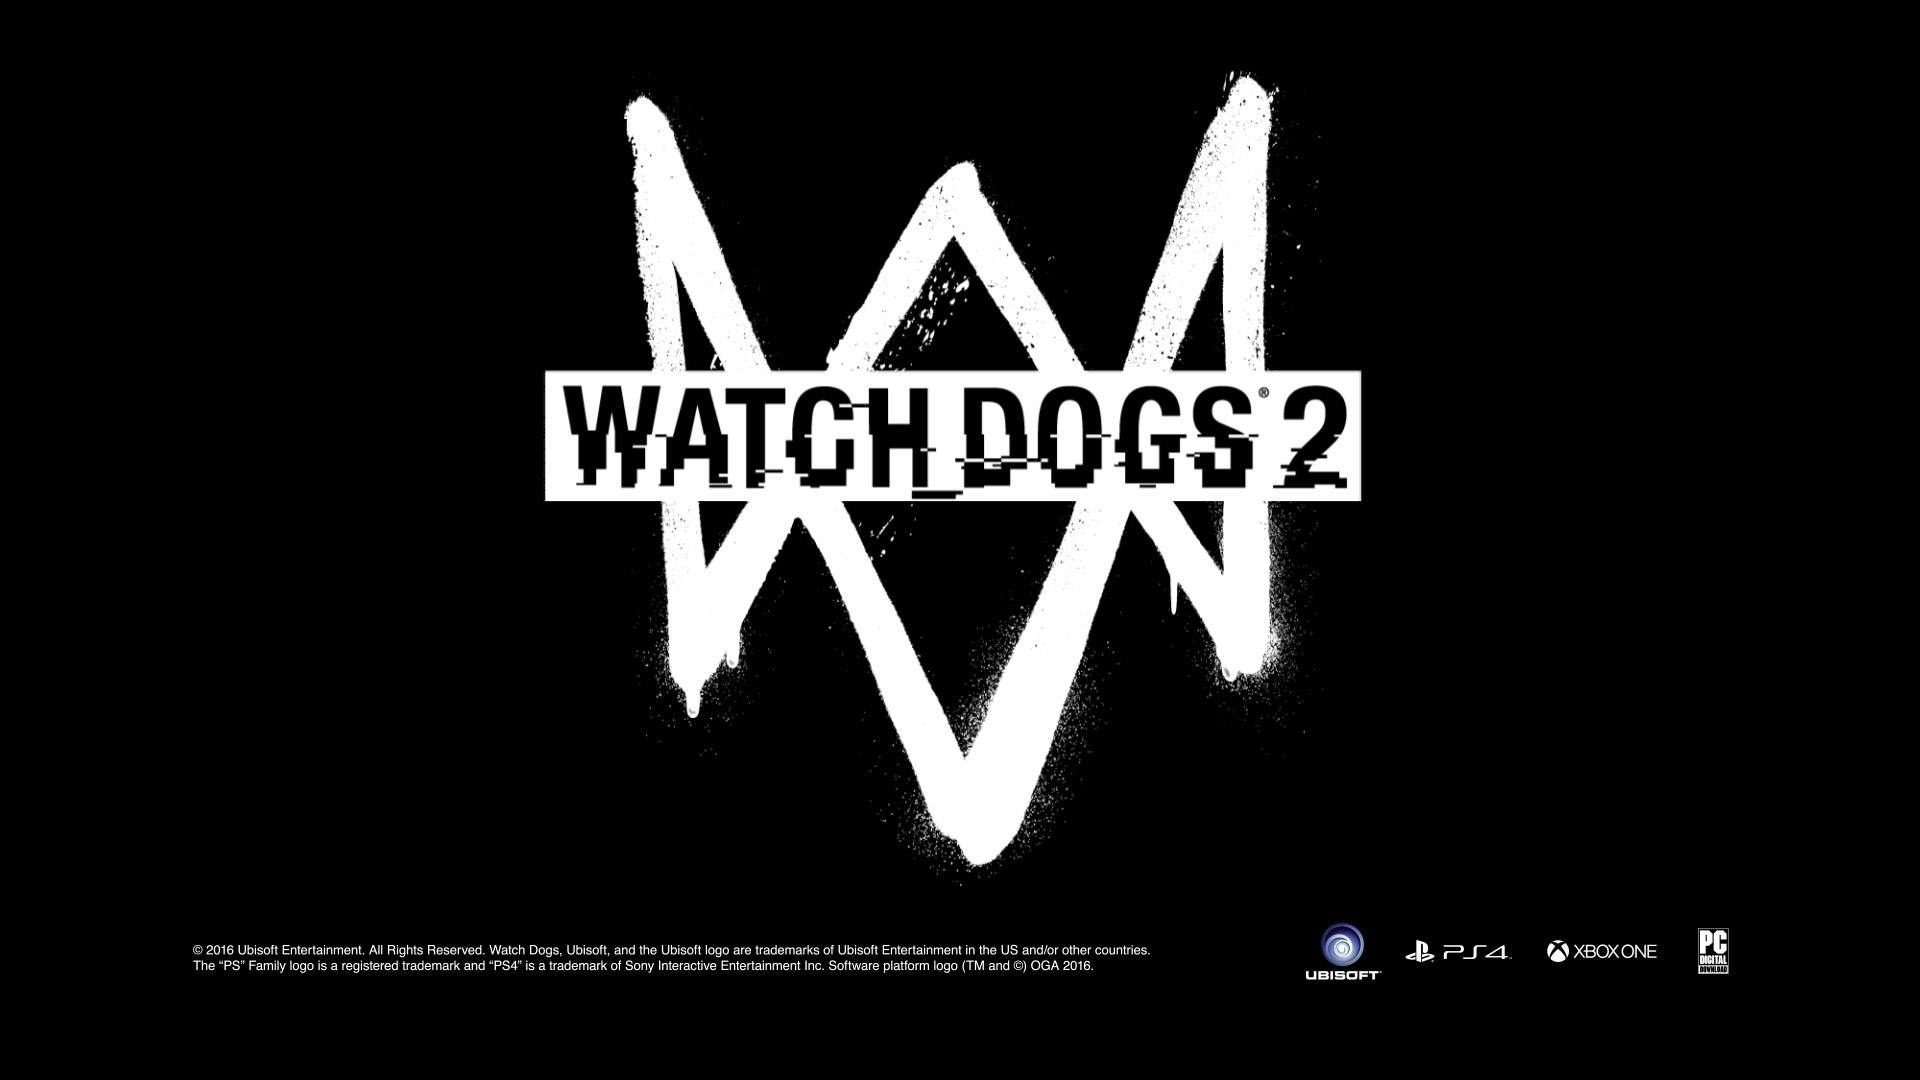 End card of watch dogs 2